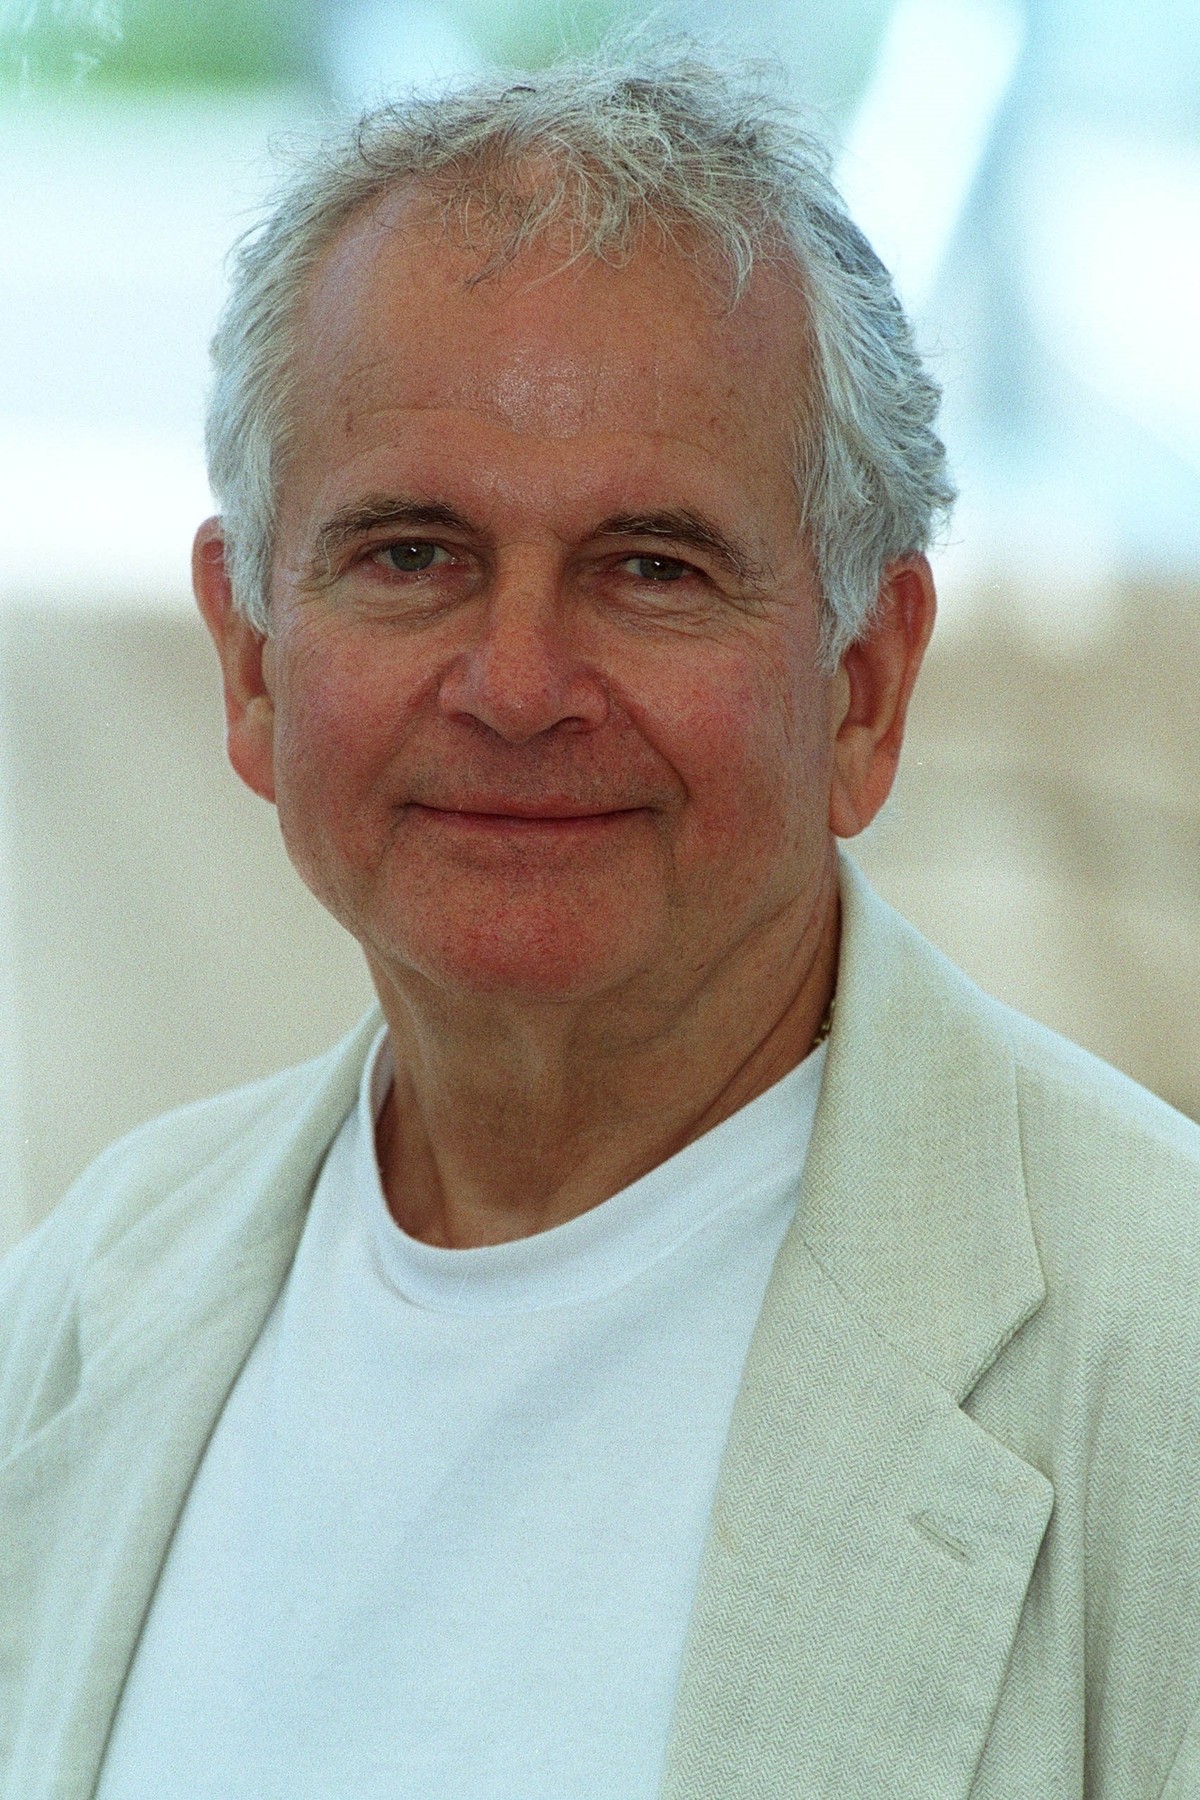 London, UNITED KINGDOM  - British actor Ian Holm has died at the age of 88, according to a statement from his agent.

Holm had a long and varied acting career that saw him cast as a slew of characters, including Bilbo Baggins in the 